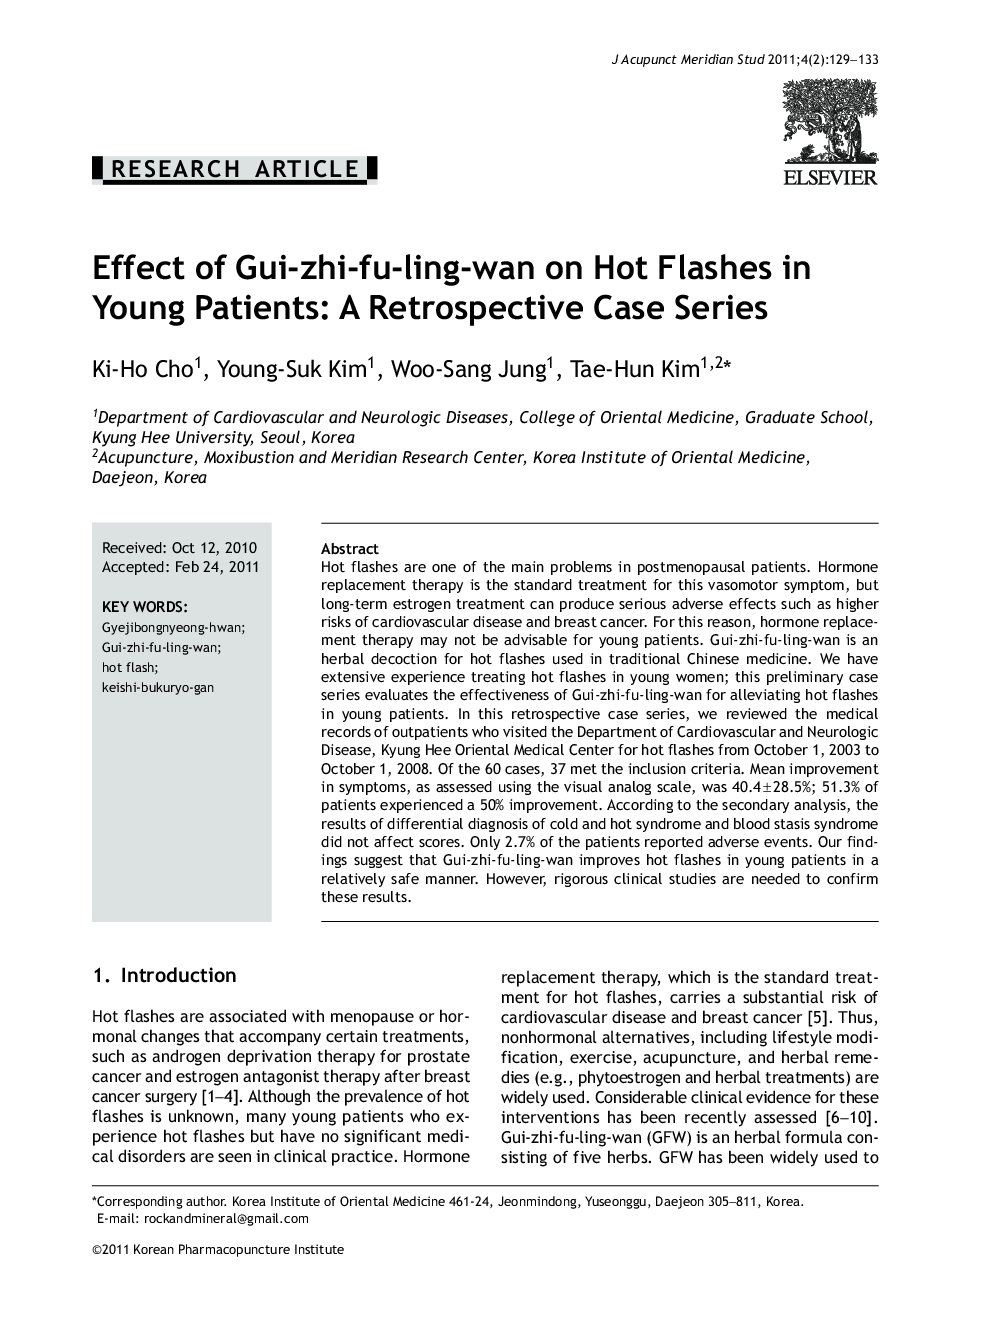 Effect of Gui-zhi-fu-ling-wan on Hot Flashes in Young Patients: A Retrospective Case Series